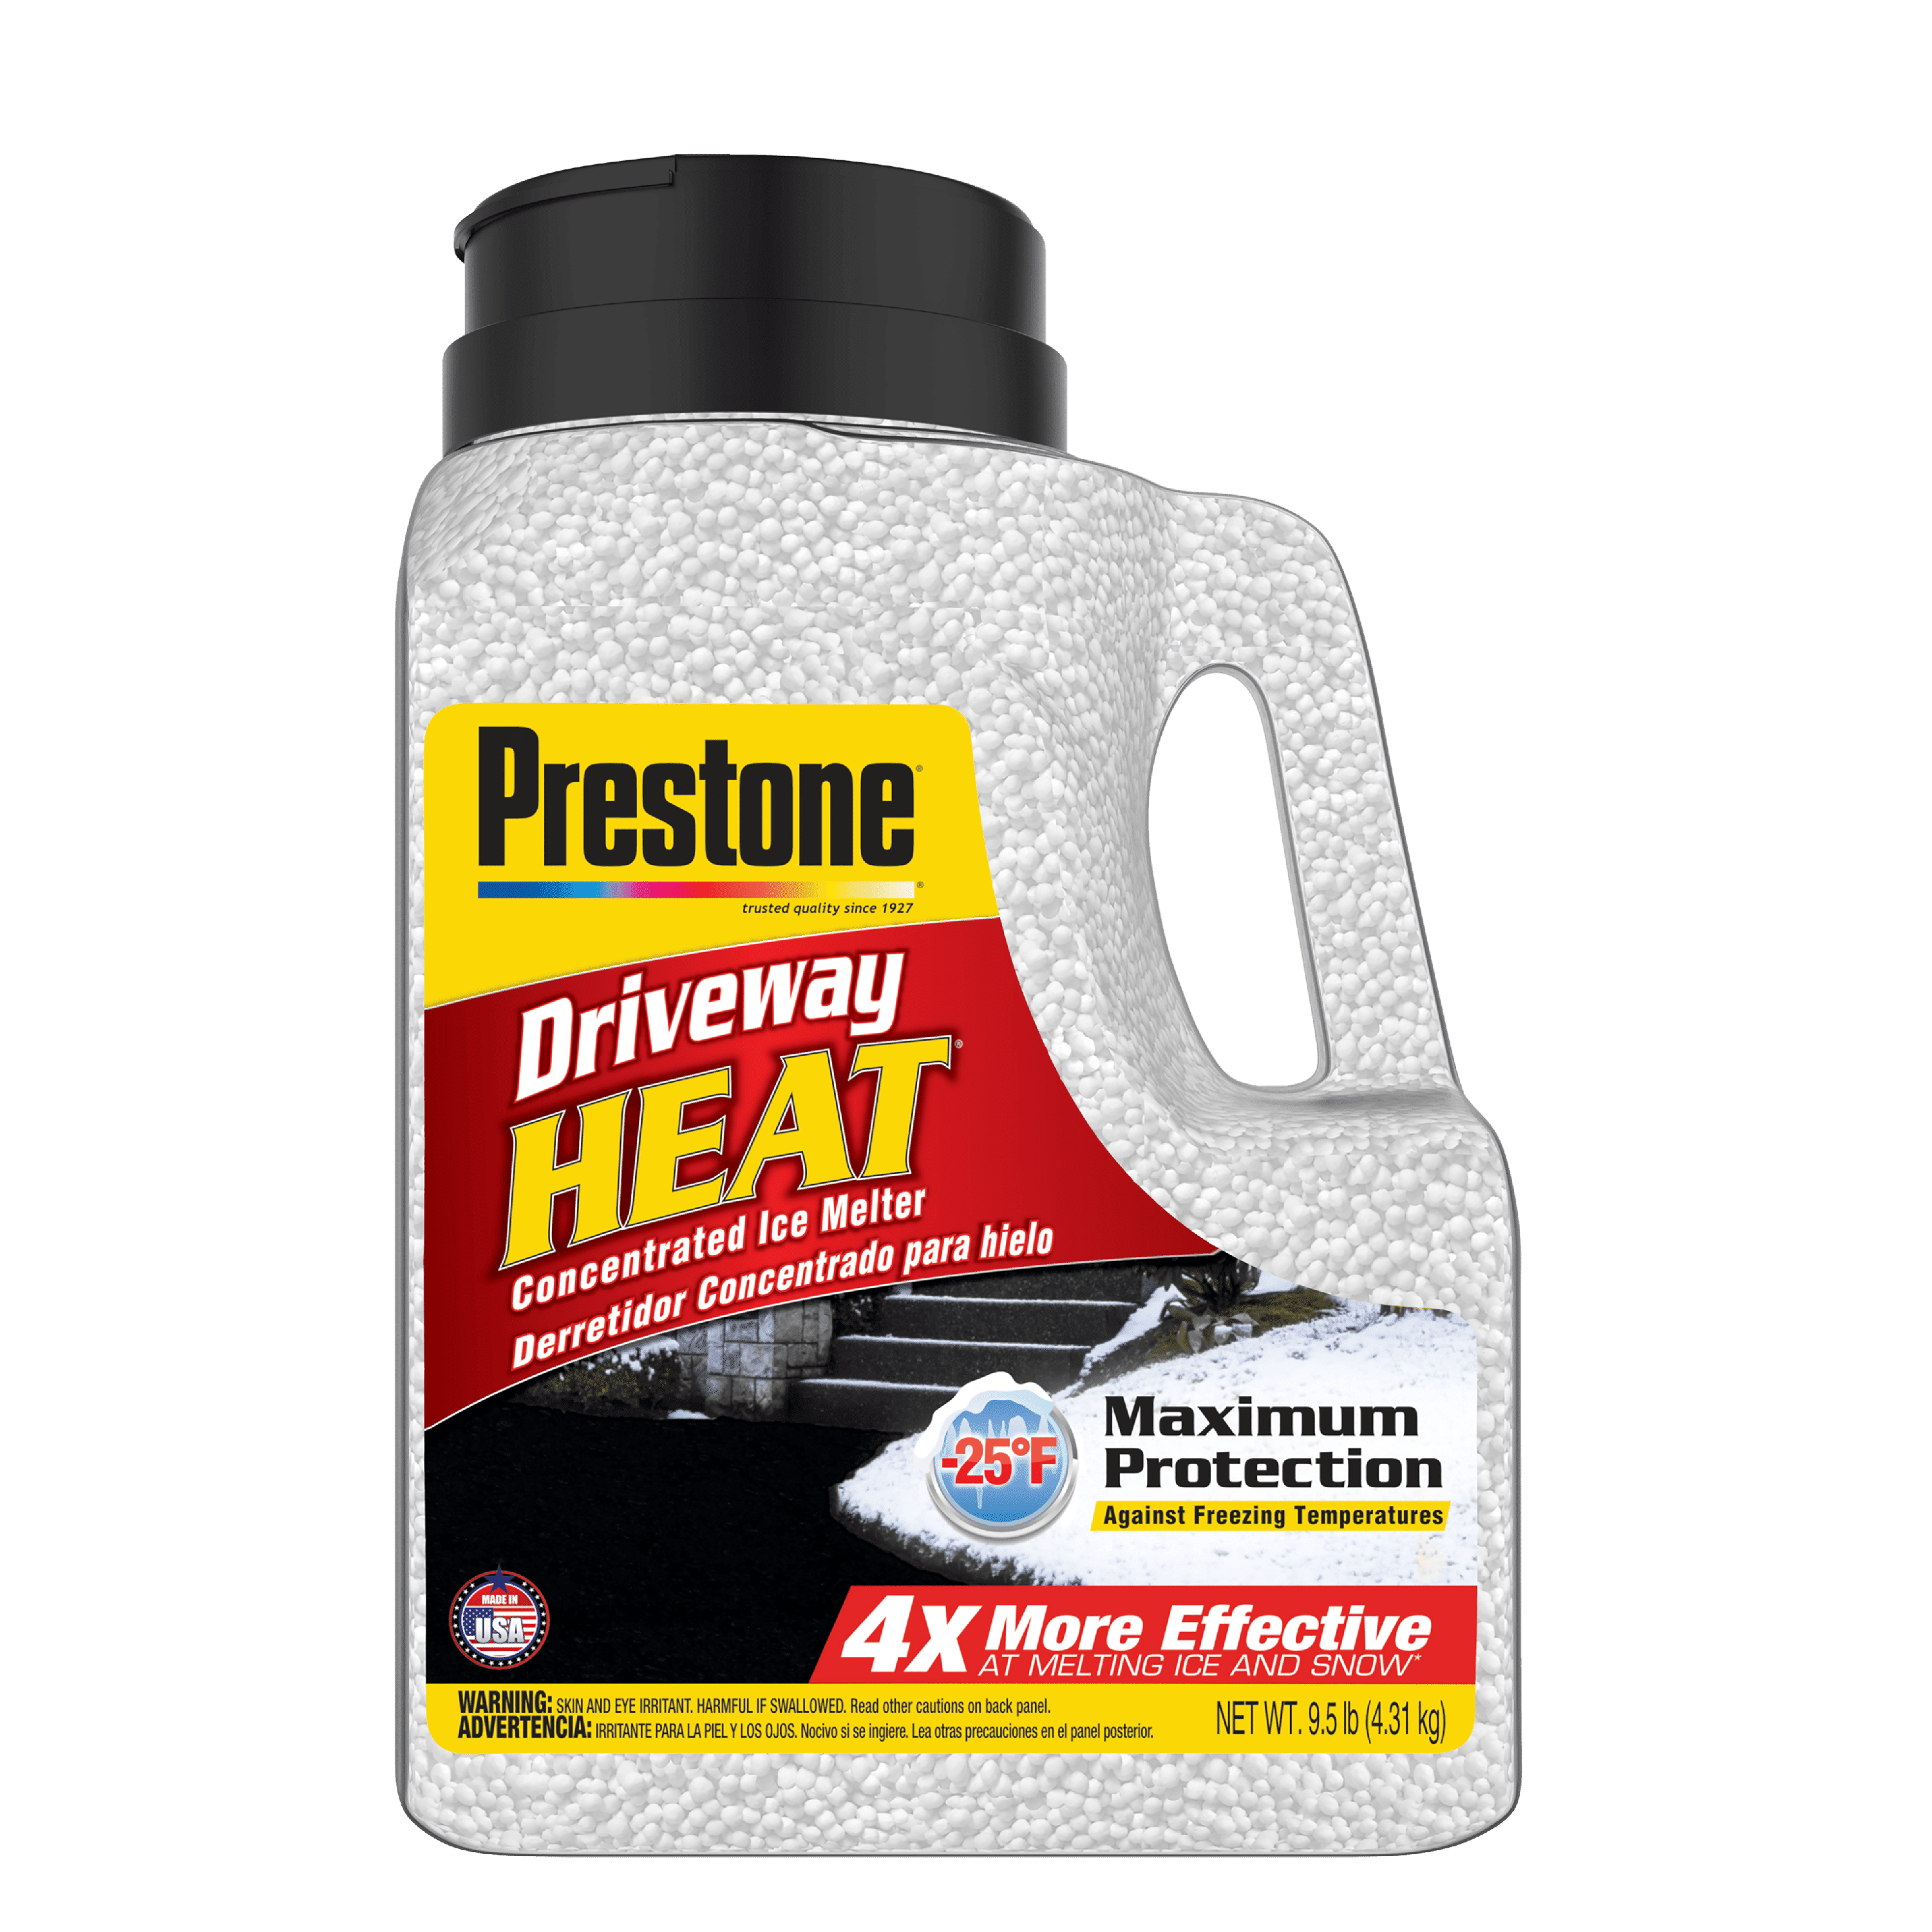 Scotwood Industries 20B-Heat Prestone Driveway Heat Concentrated Ice Melter 20-Pound 